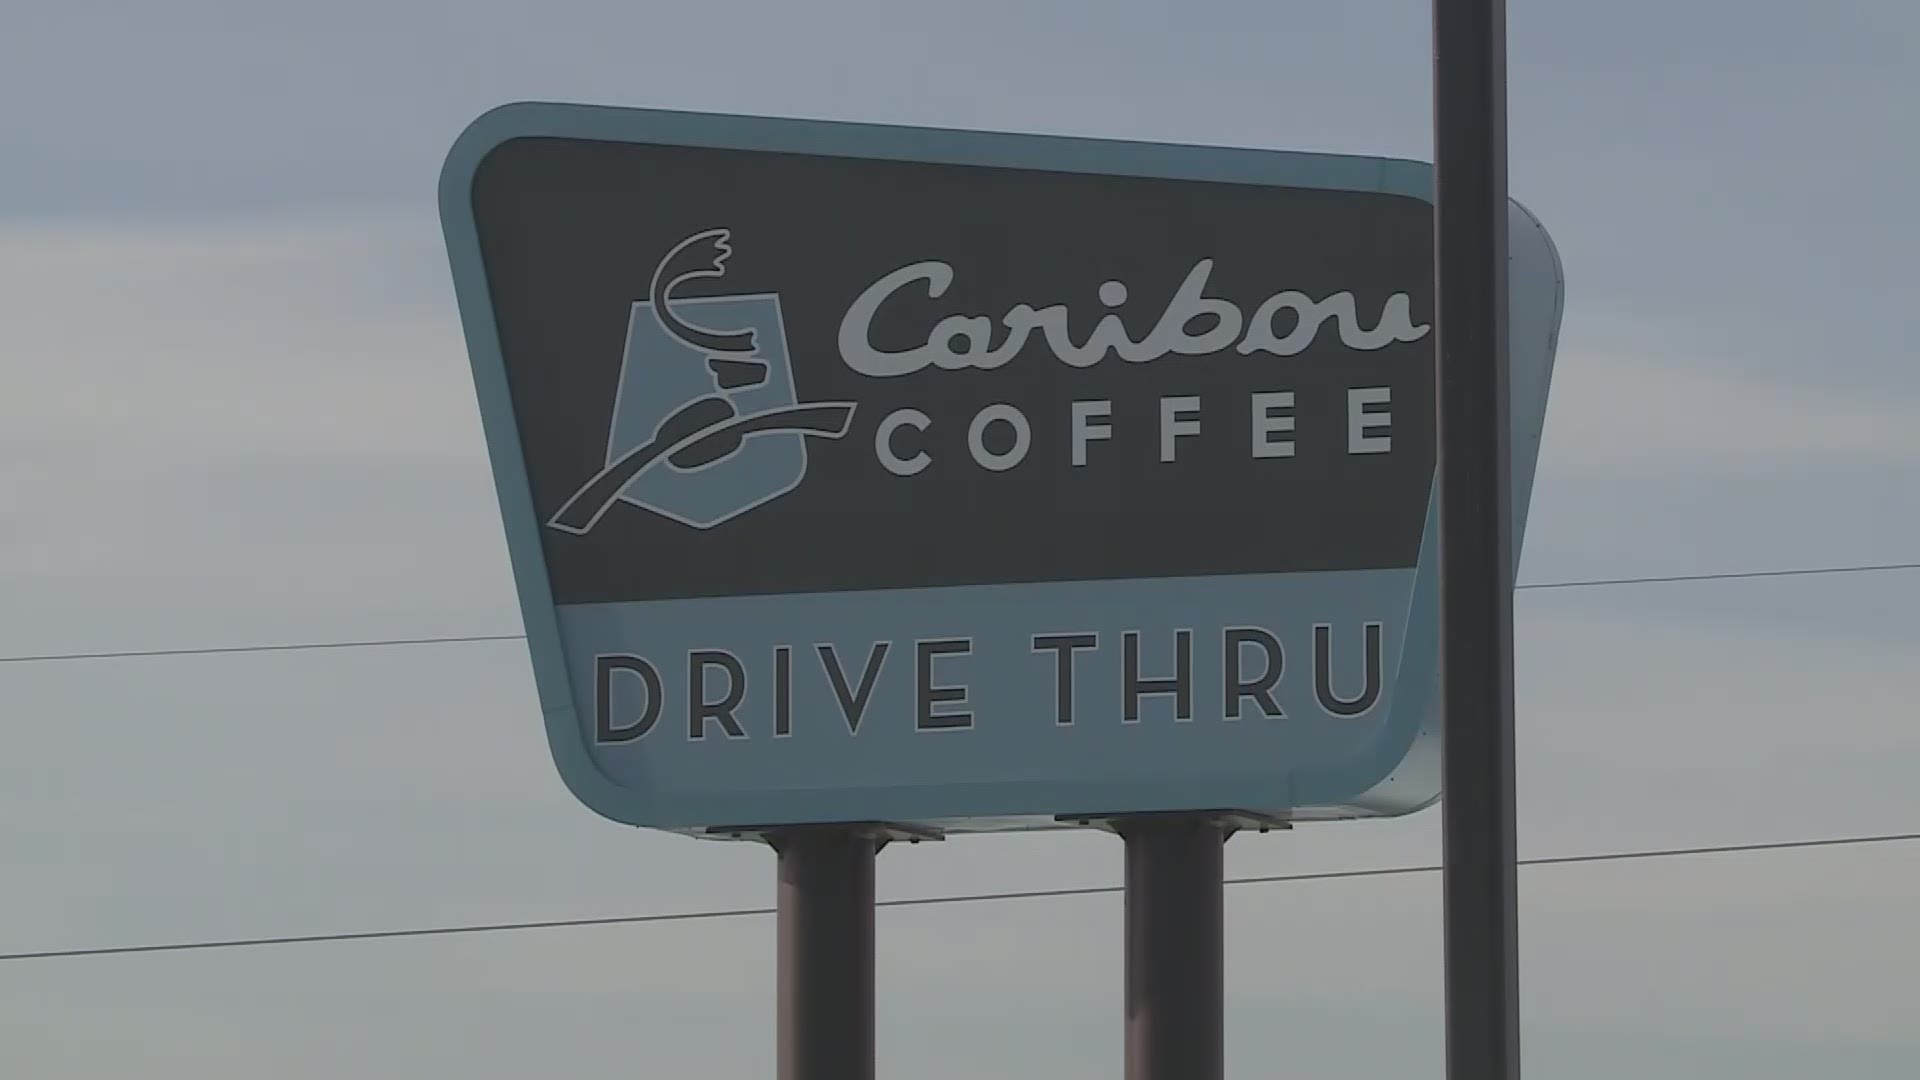 Caribou's new cabin locations are just under 600 square feet with no interior seating, and only drive-through windows.